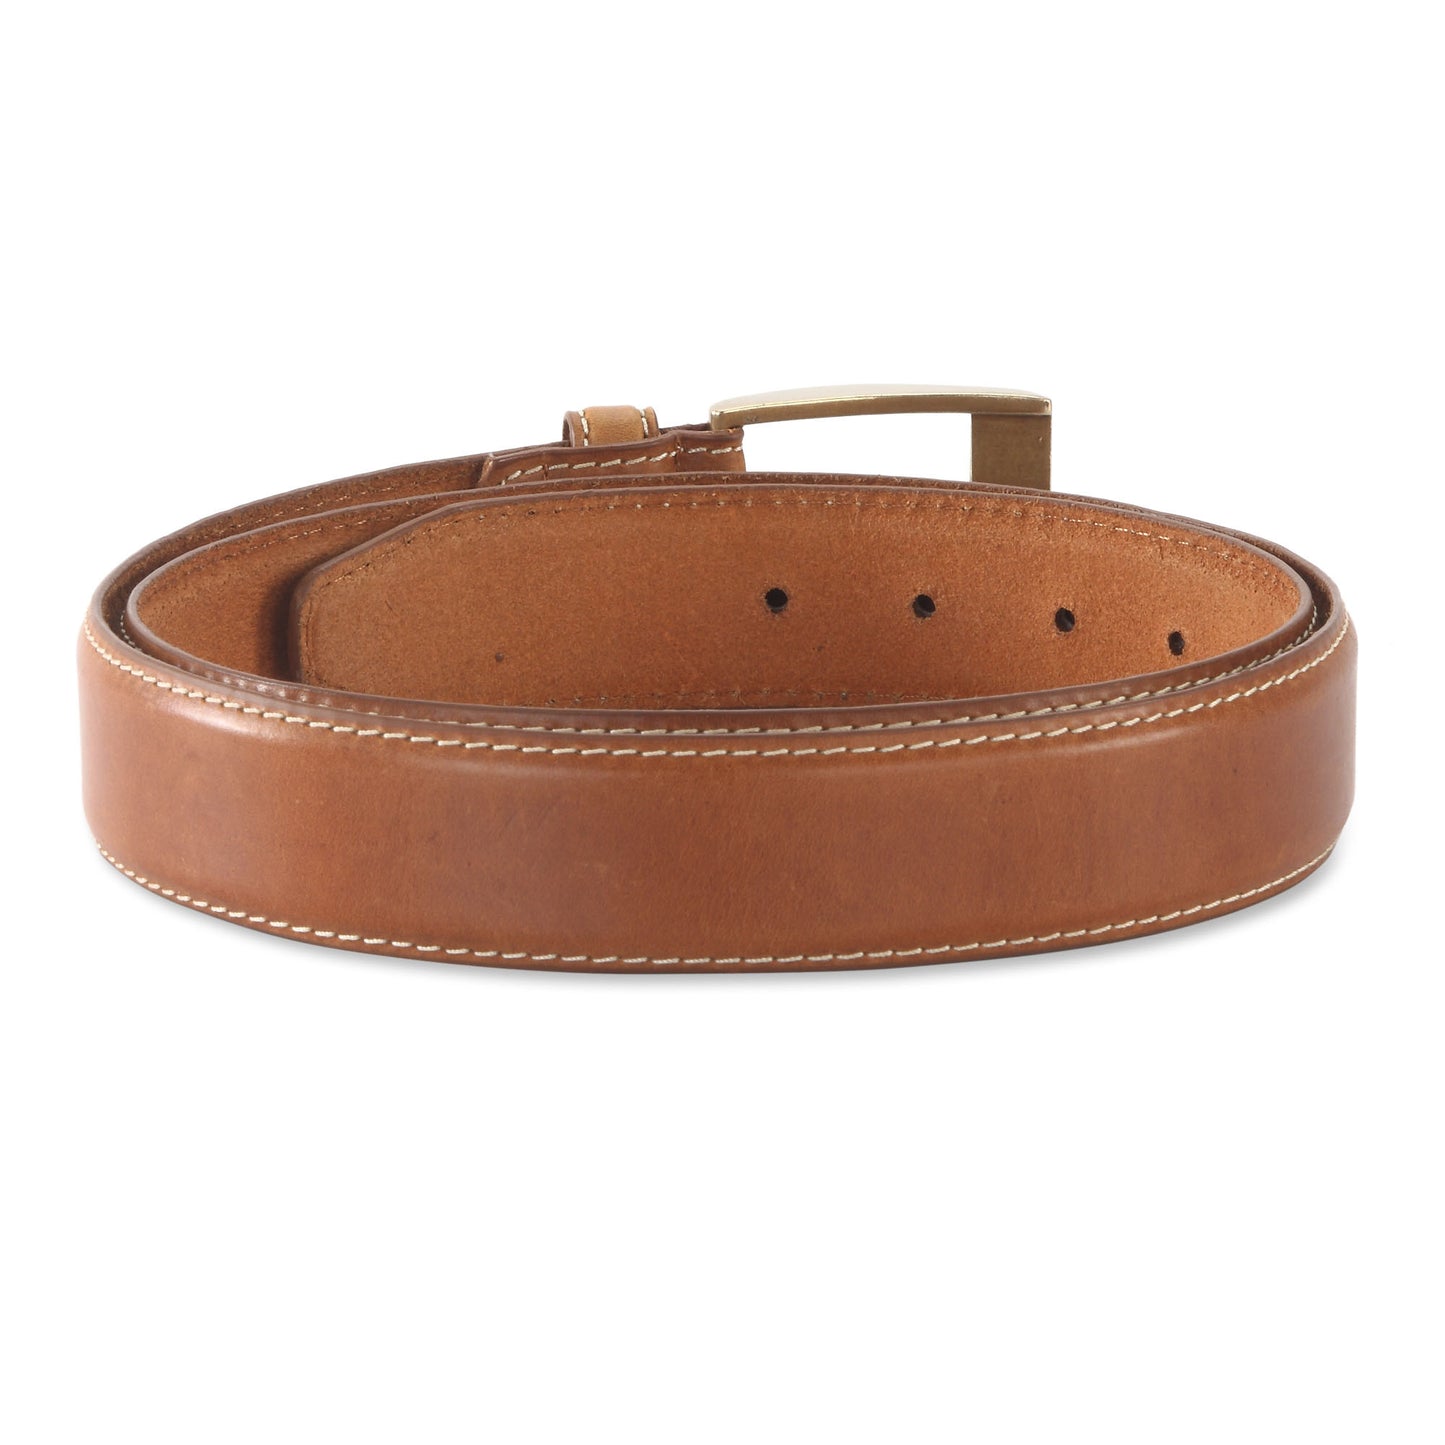 391901 - one and a half inch wide leather belt in tan color top grain leather - back view